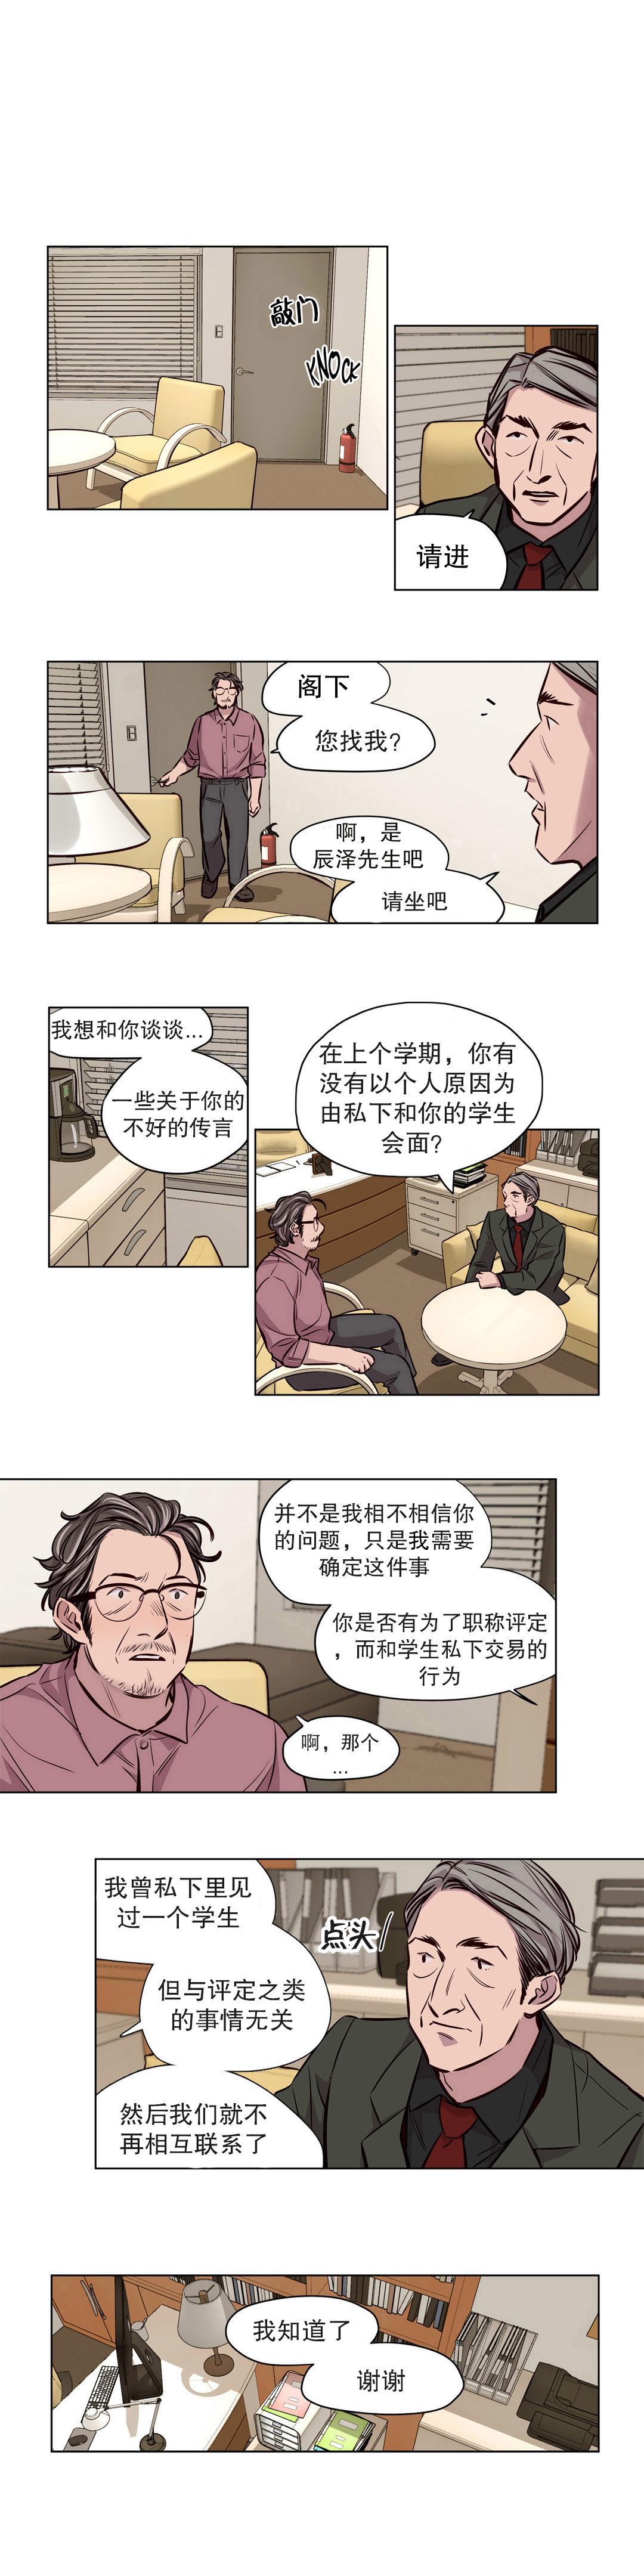 [Ramjak] 赎罪营(Atonement Camp) Ch.50-51 (Chinese) 3